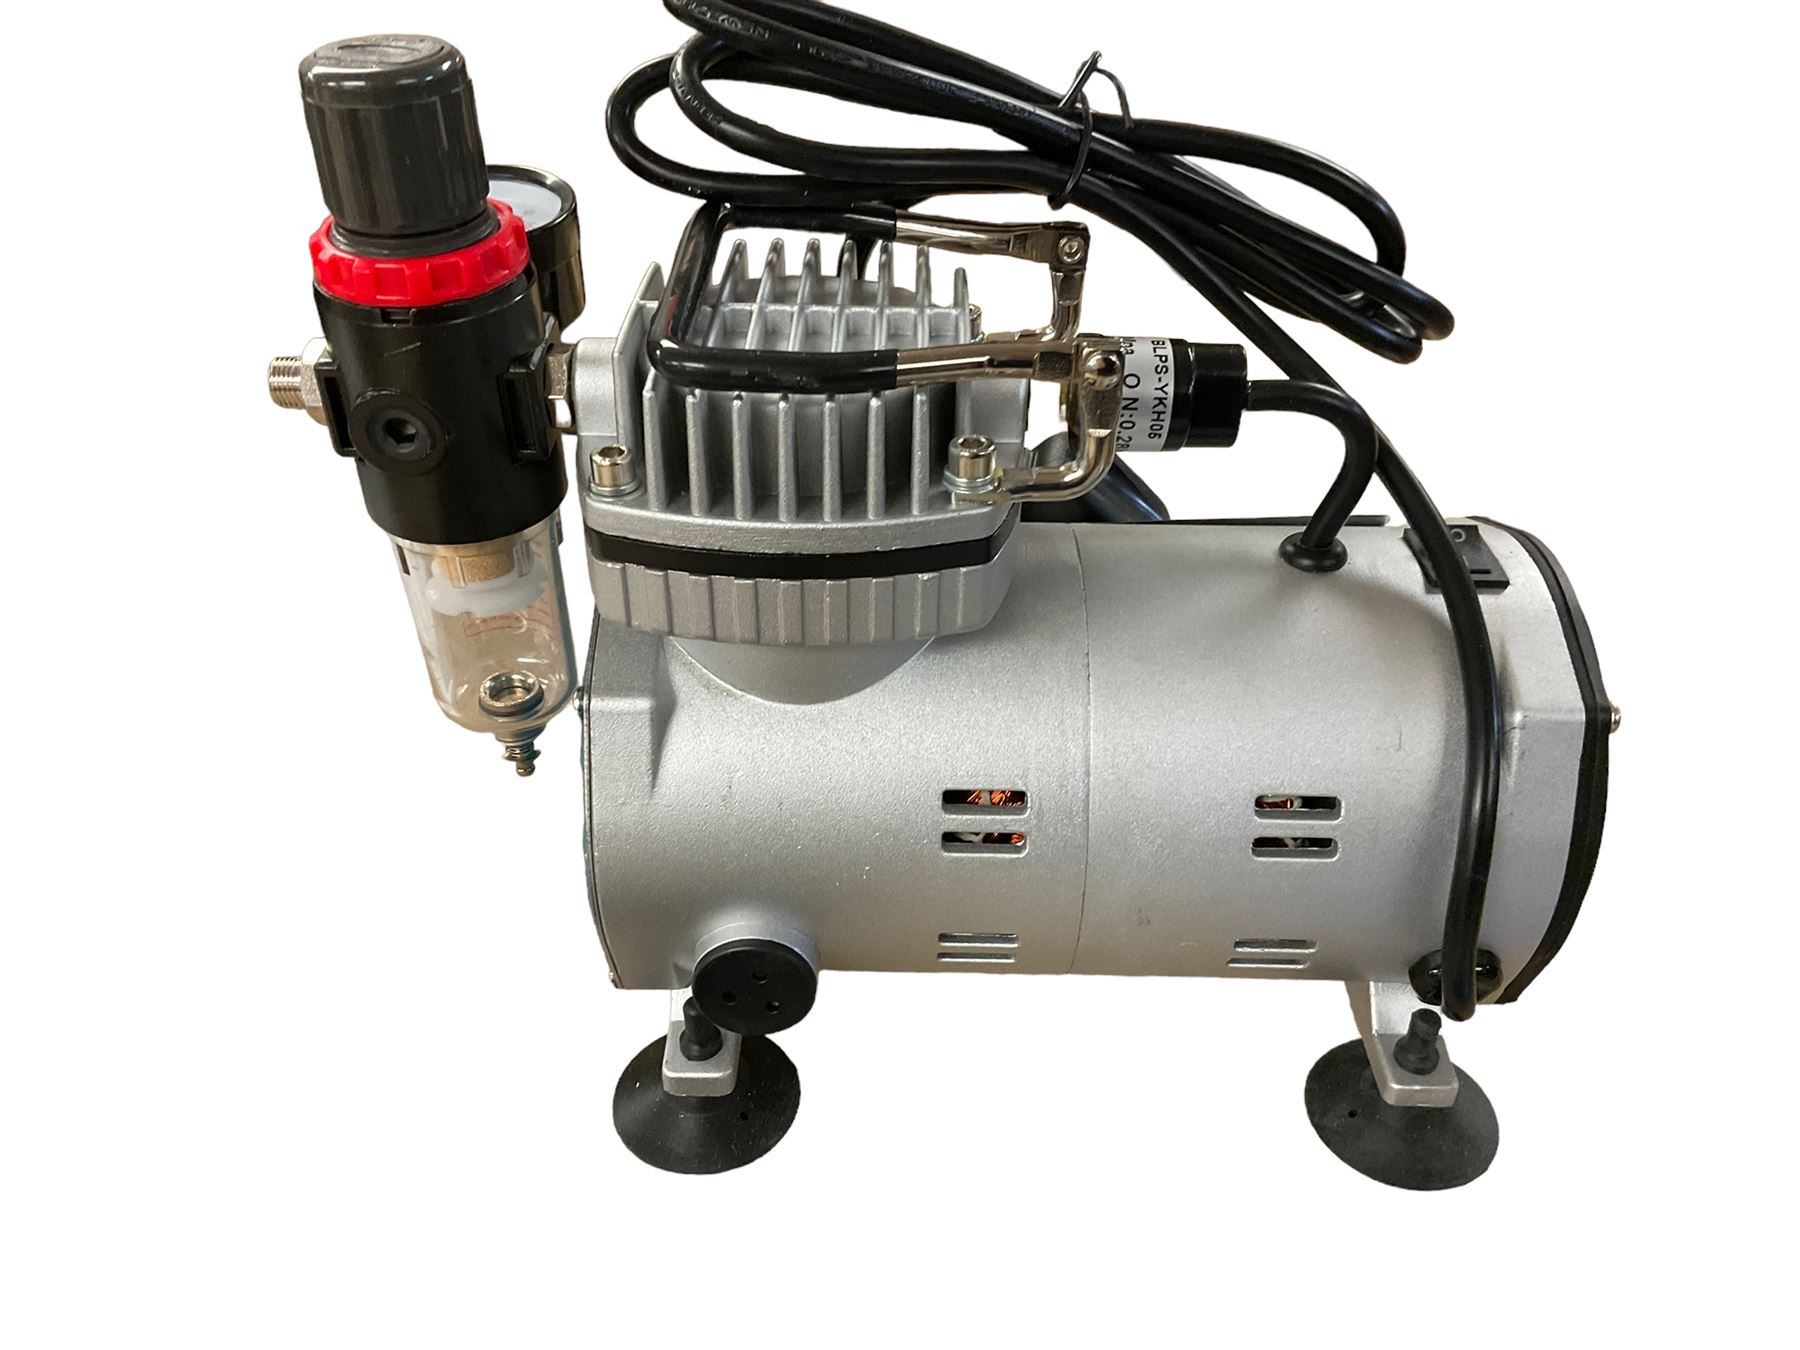 Workzone air compressor with attachments - Image 2 of 4